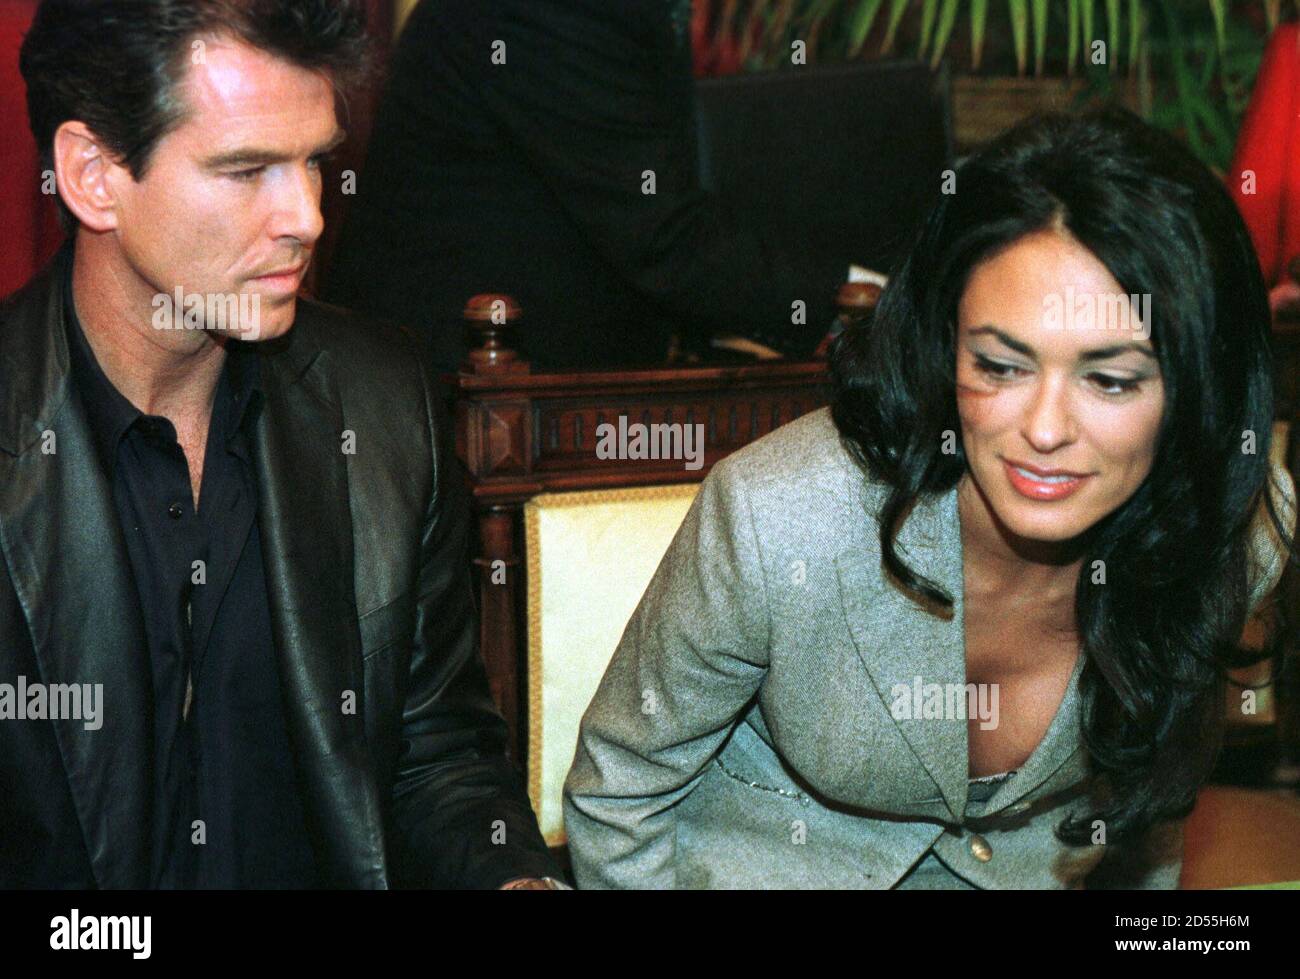 Actor Pierce Brosnan looks at Italian actress Maria Grazia Cuccinotta upon arriving in Bilbao airport February 15. Brosnan and Cuccinotta will film in Spain some sequences of the new James Bond film "The World is not Enough", also starring [Robert Carlyle, Serena Scott Thomas, Denise Richards and Sophie Marceau.] Stock Photo